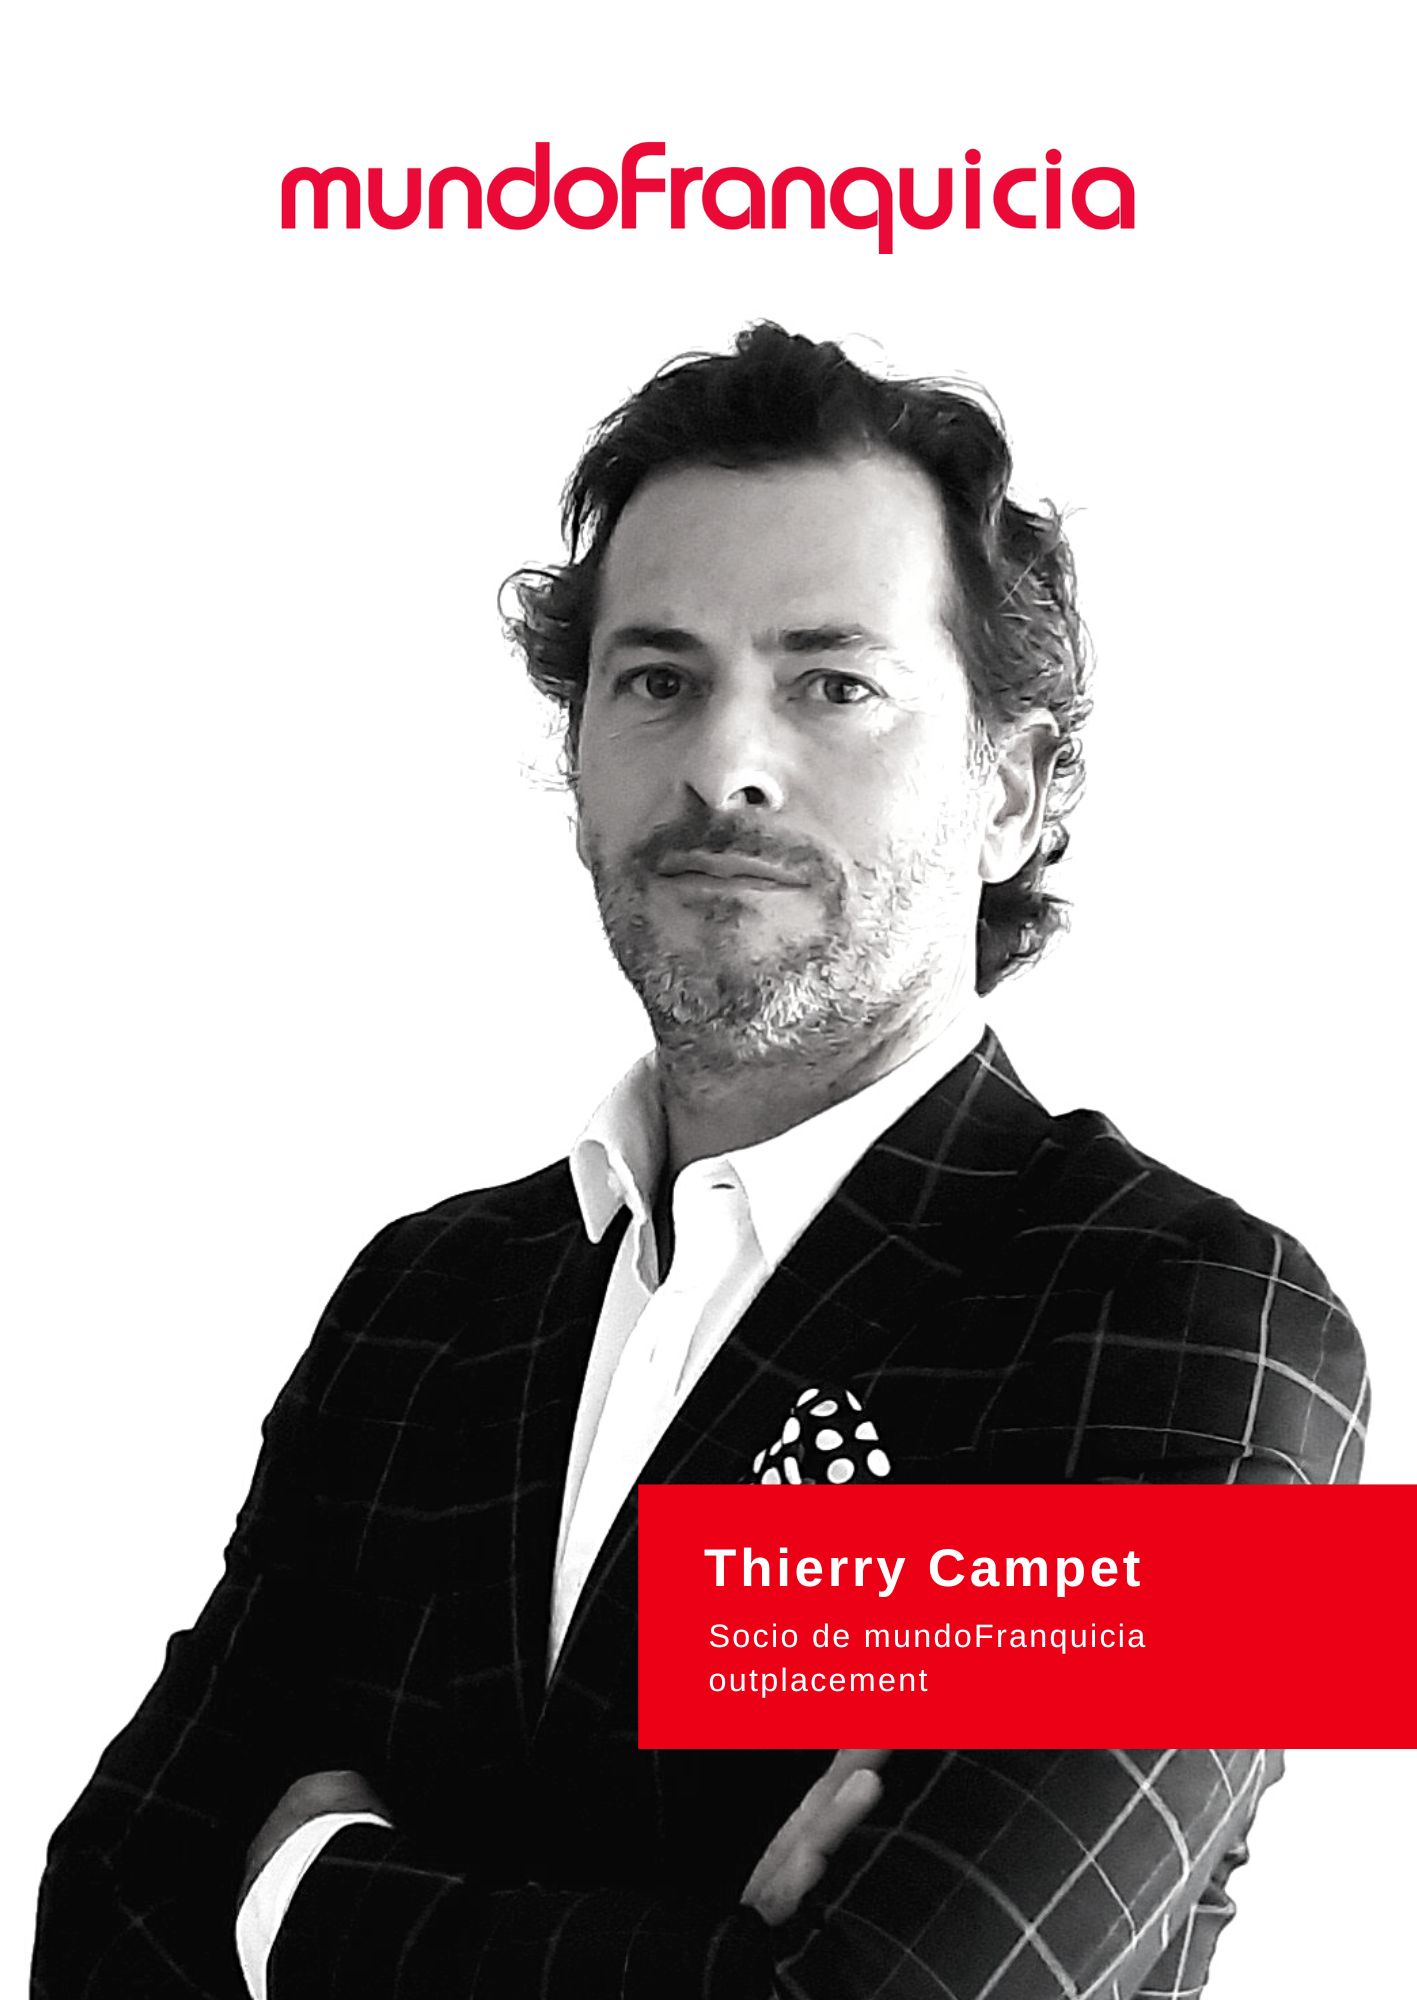 Thierry Campet